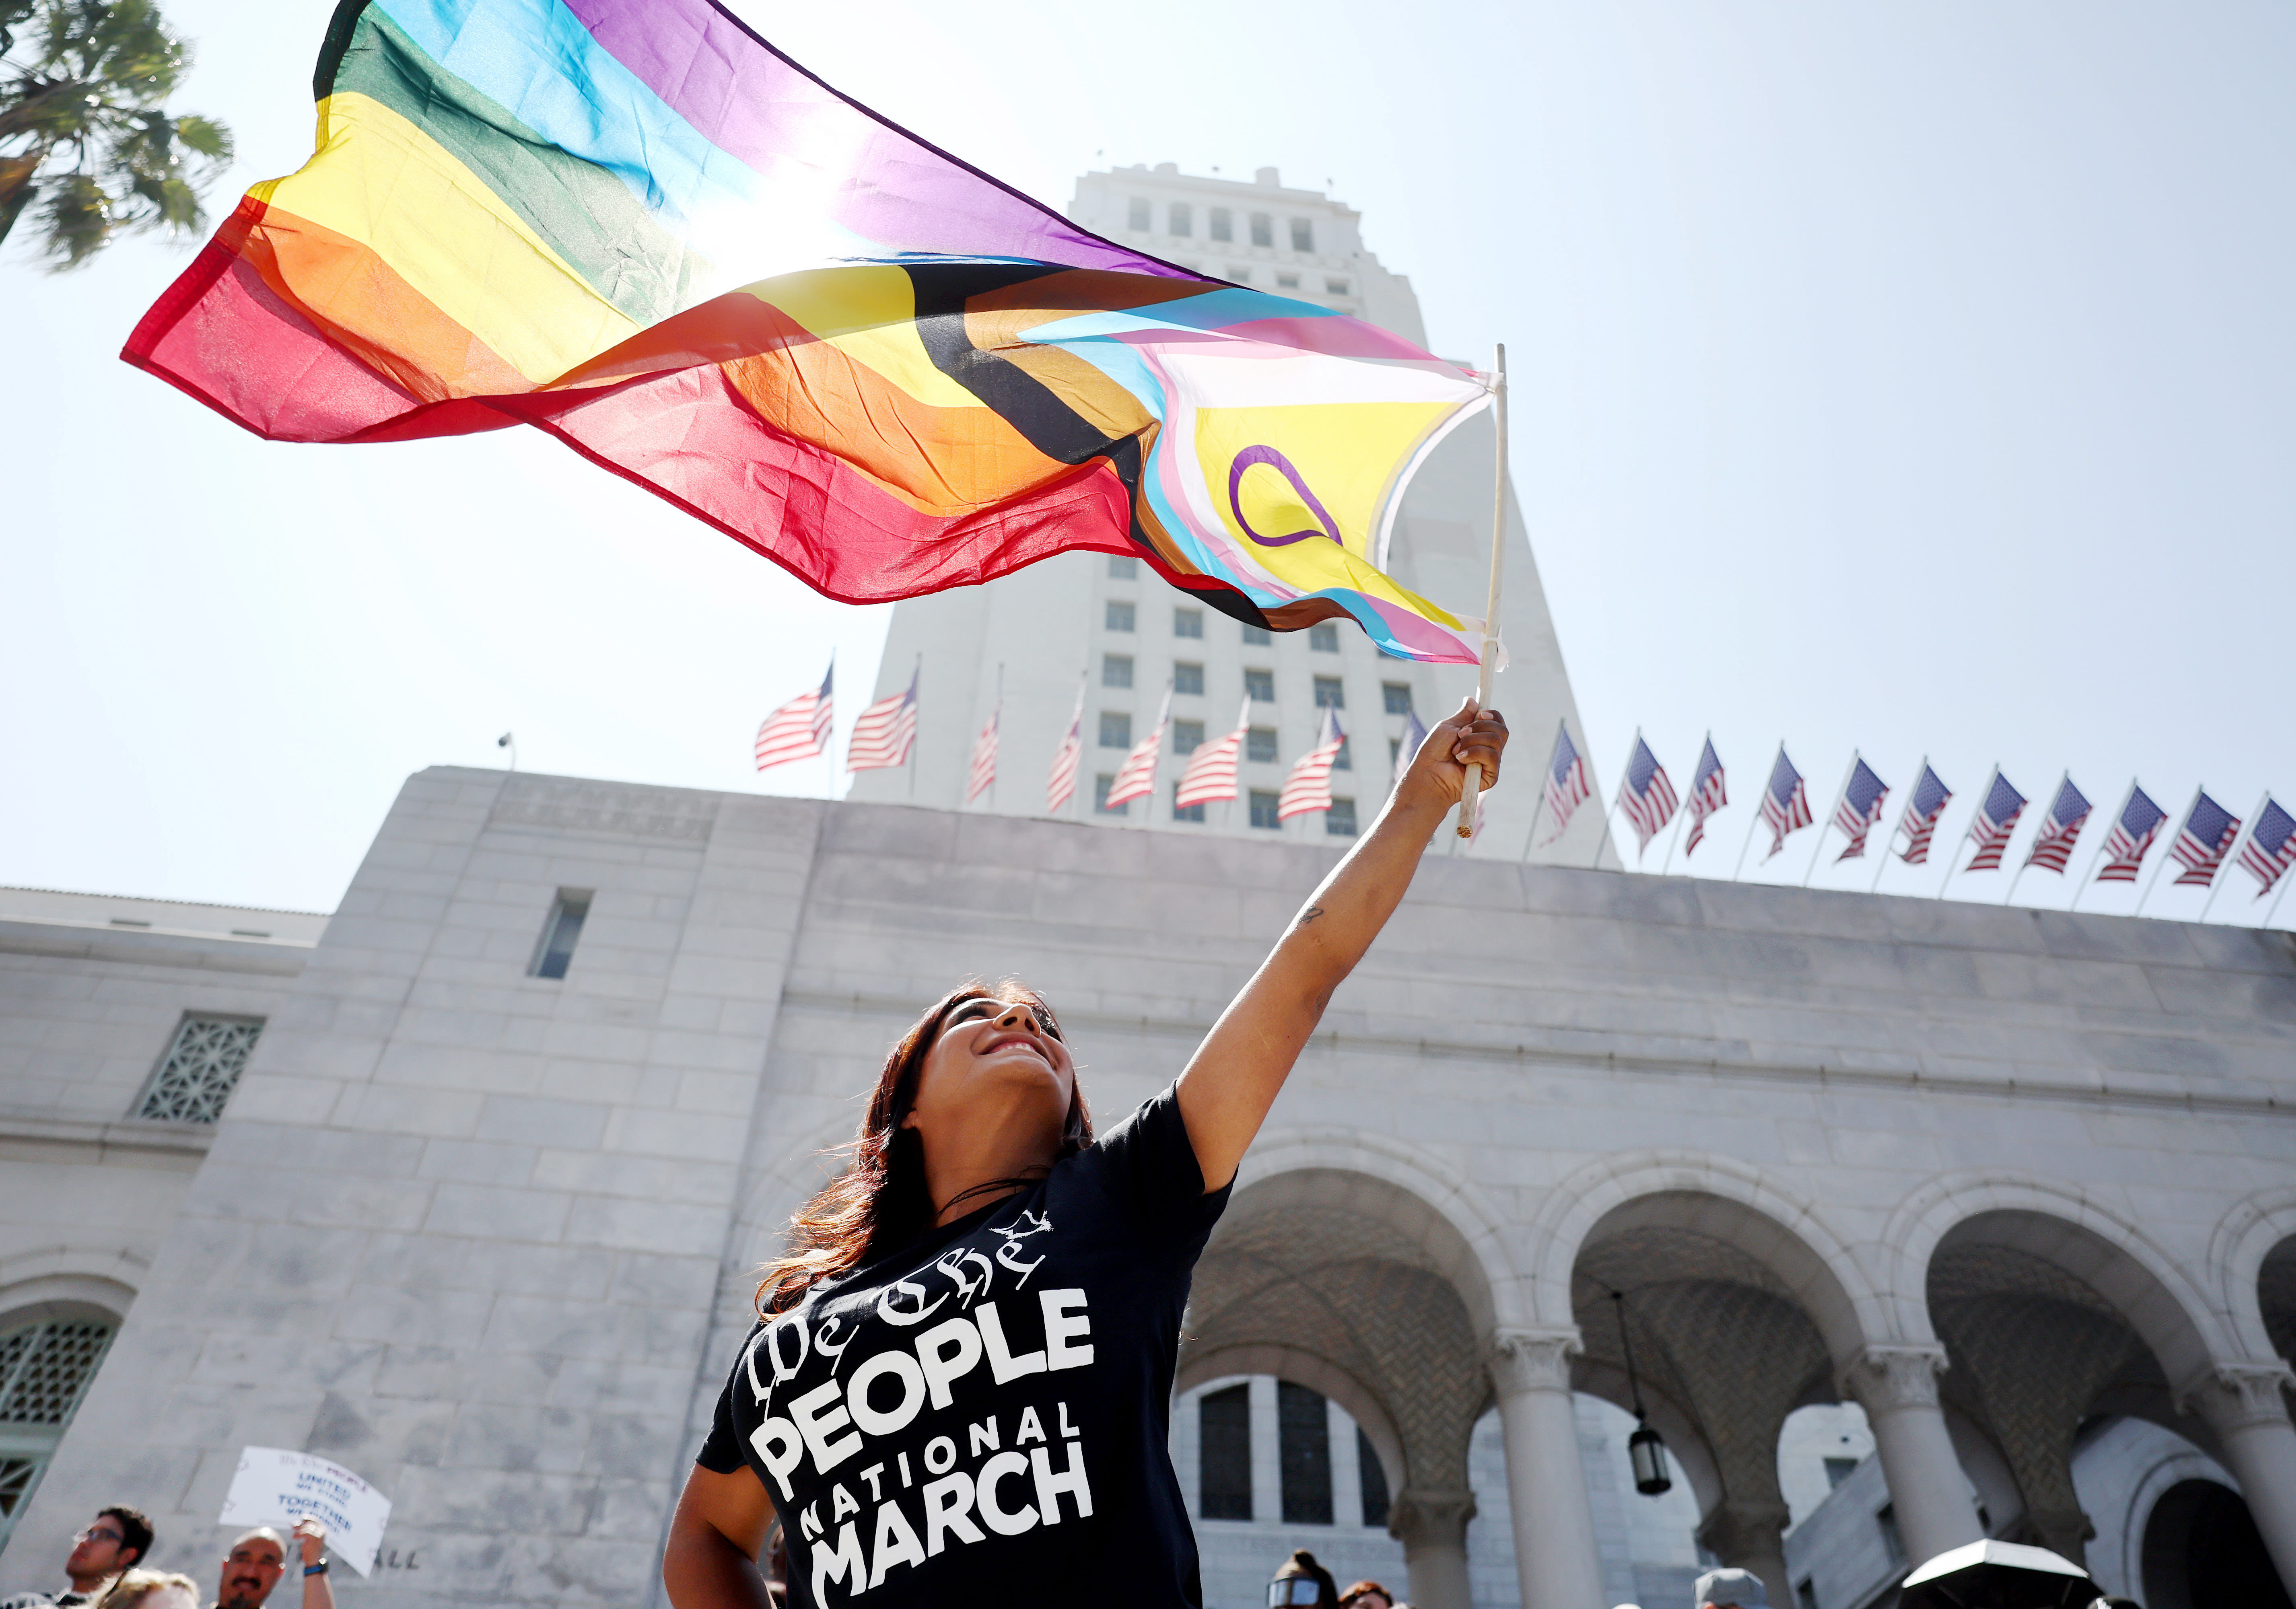 The U.S. has caught up to California on views of LGBTQ+ rights, poll shows